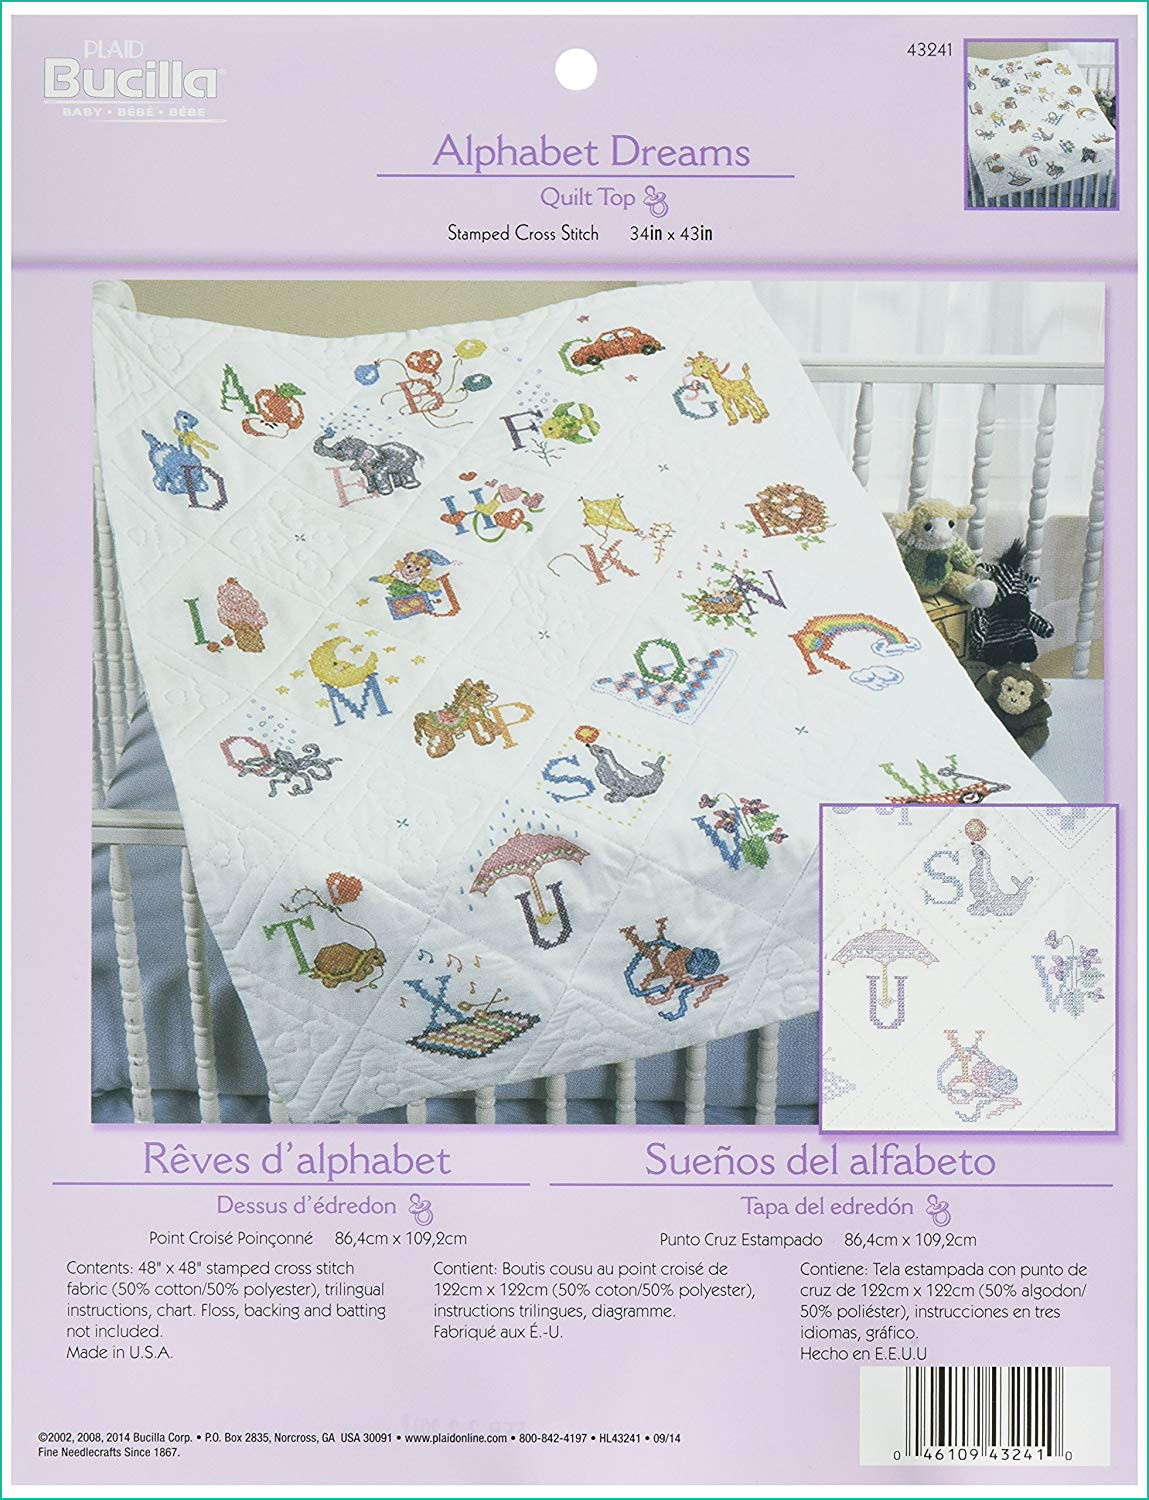 Hand Embroidery Patterns For Baby Quilts Pre Stamped Quilt Blocks For Hand Embroidery Cute 52 B Amazon